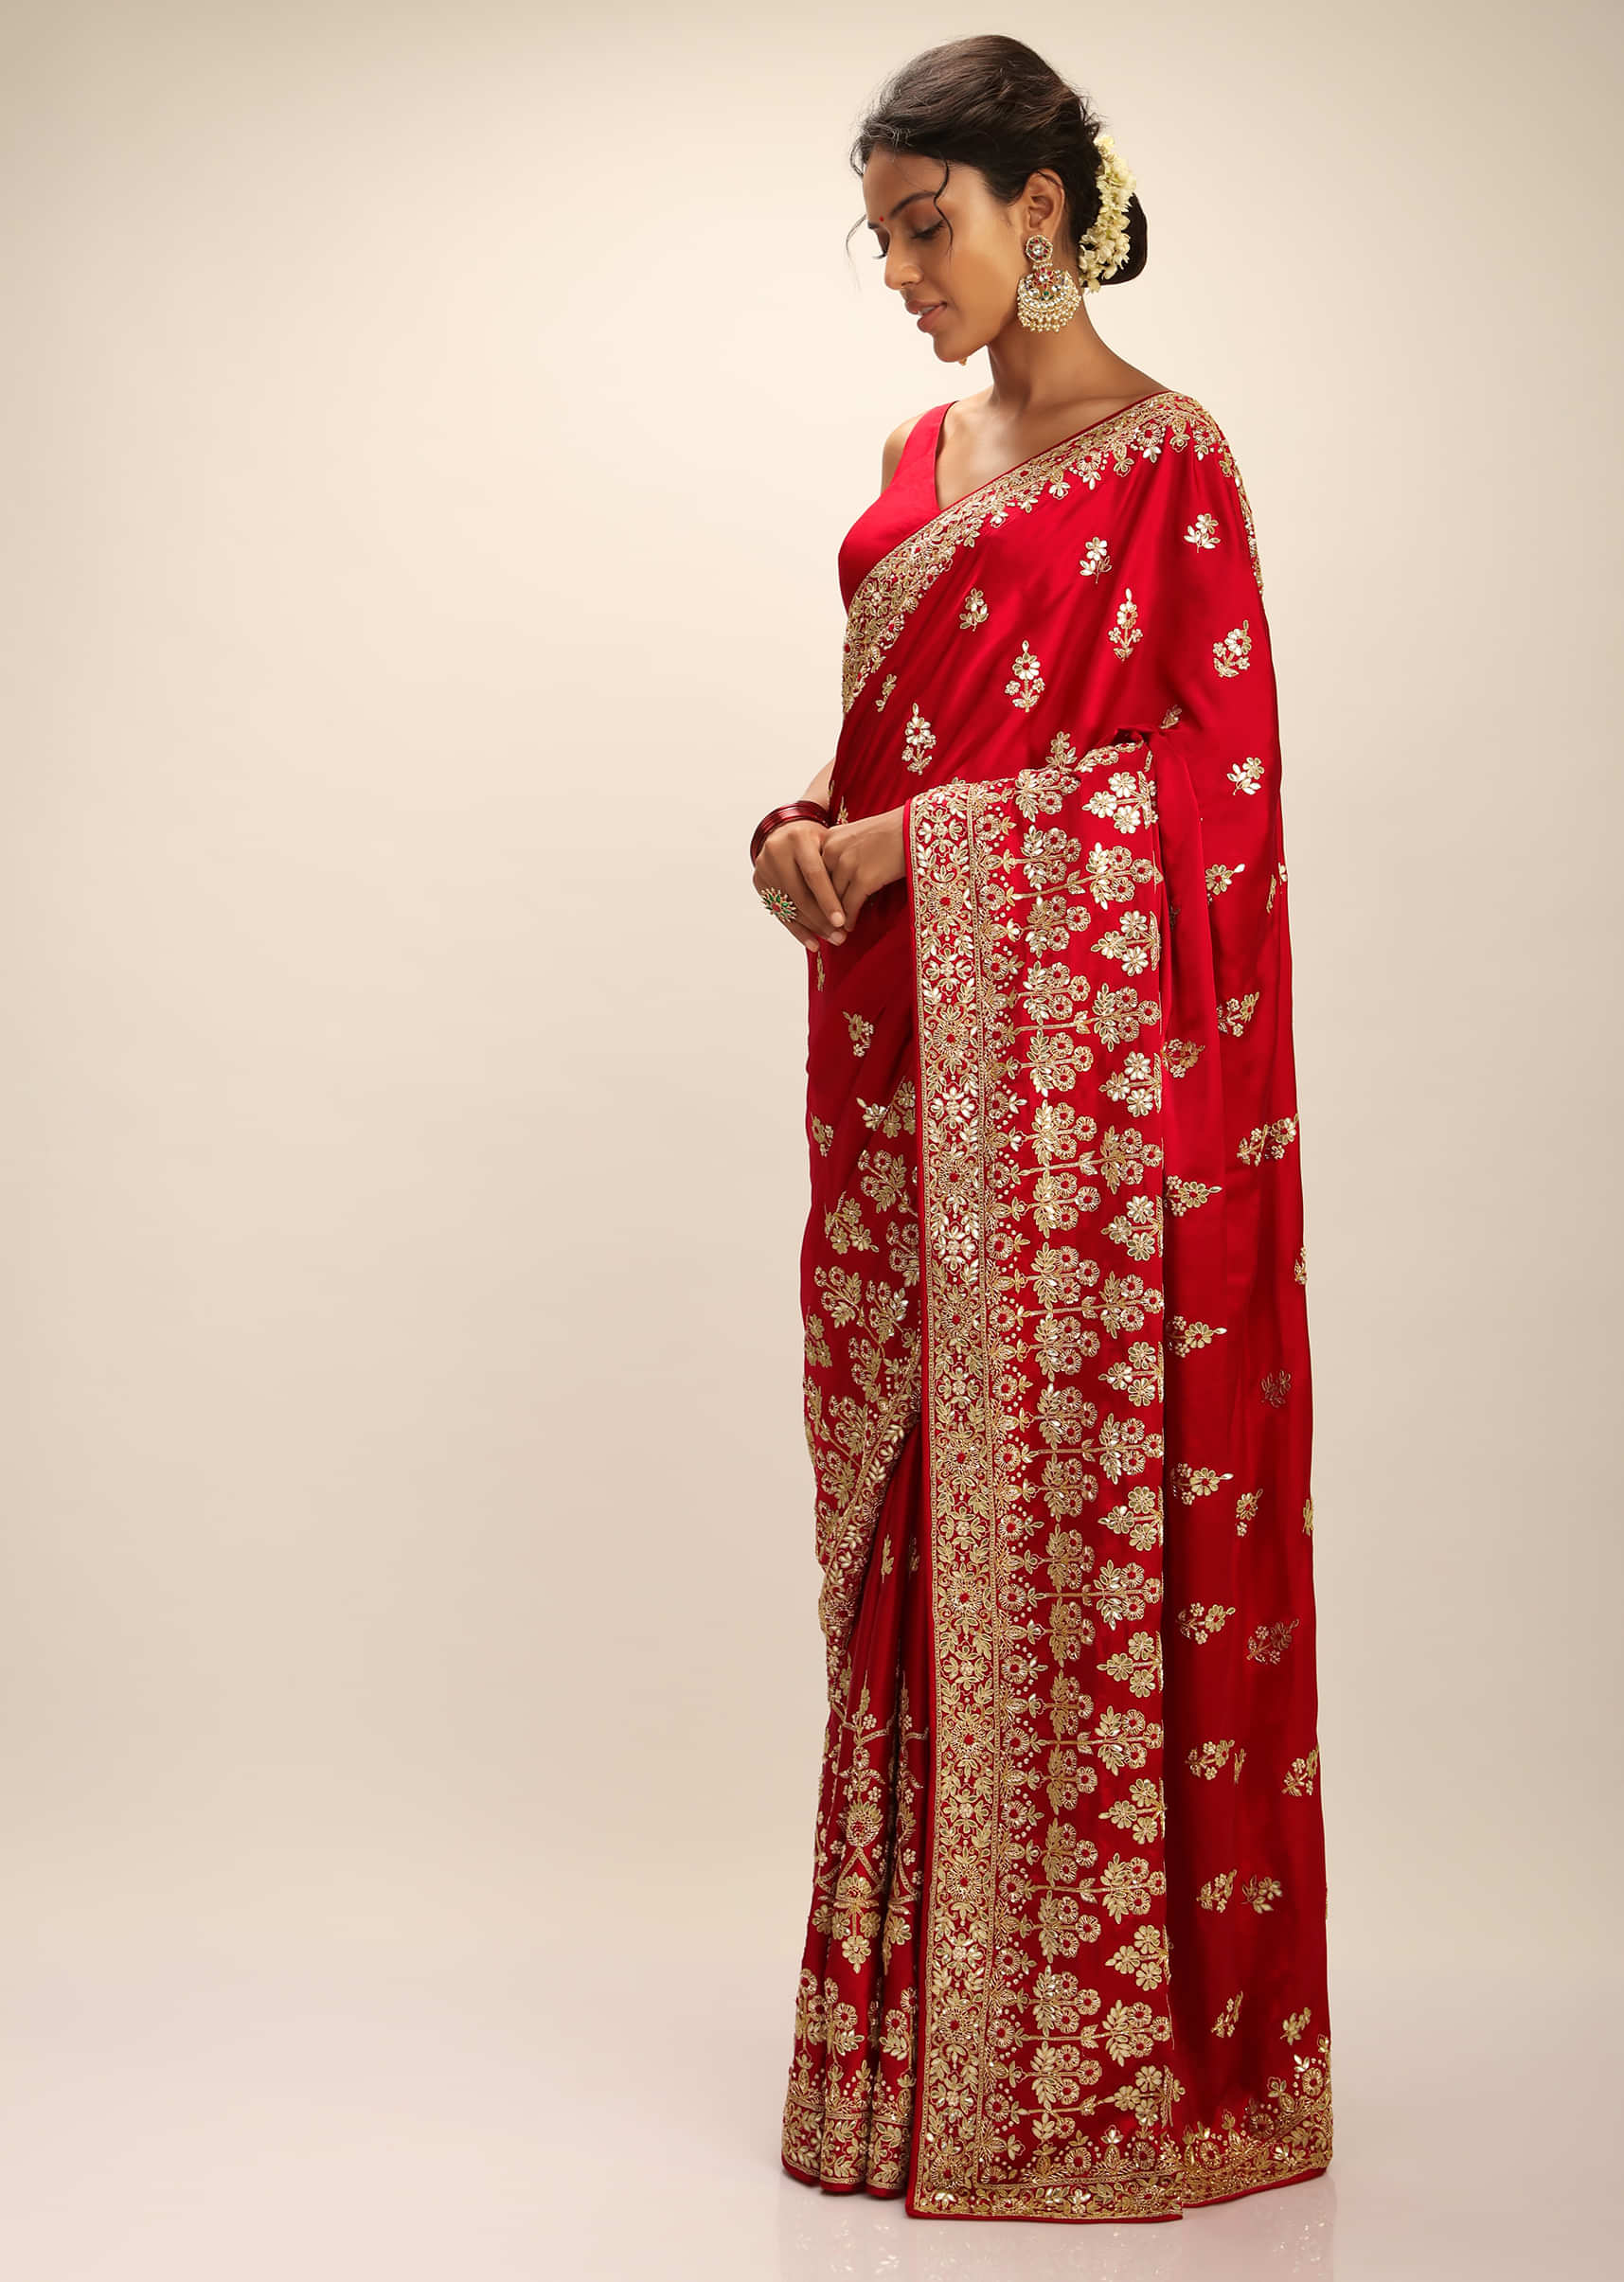 Scarlet Red Saree In Satin With Hand Embroidered Gotta Patti And Zardosi Work In Floral Motifs 